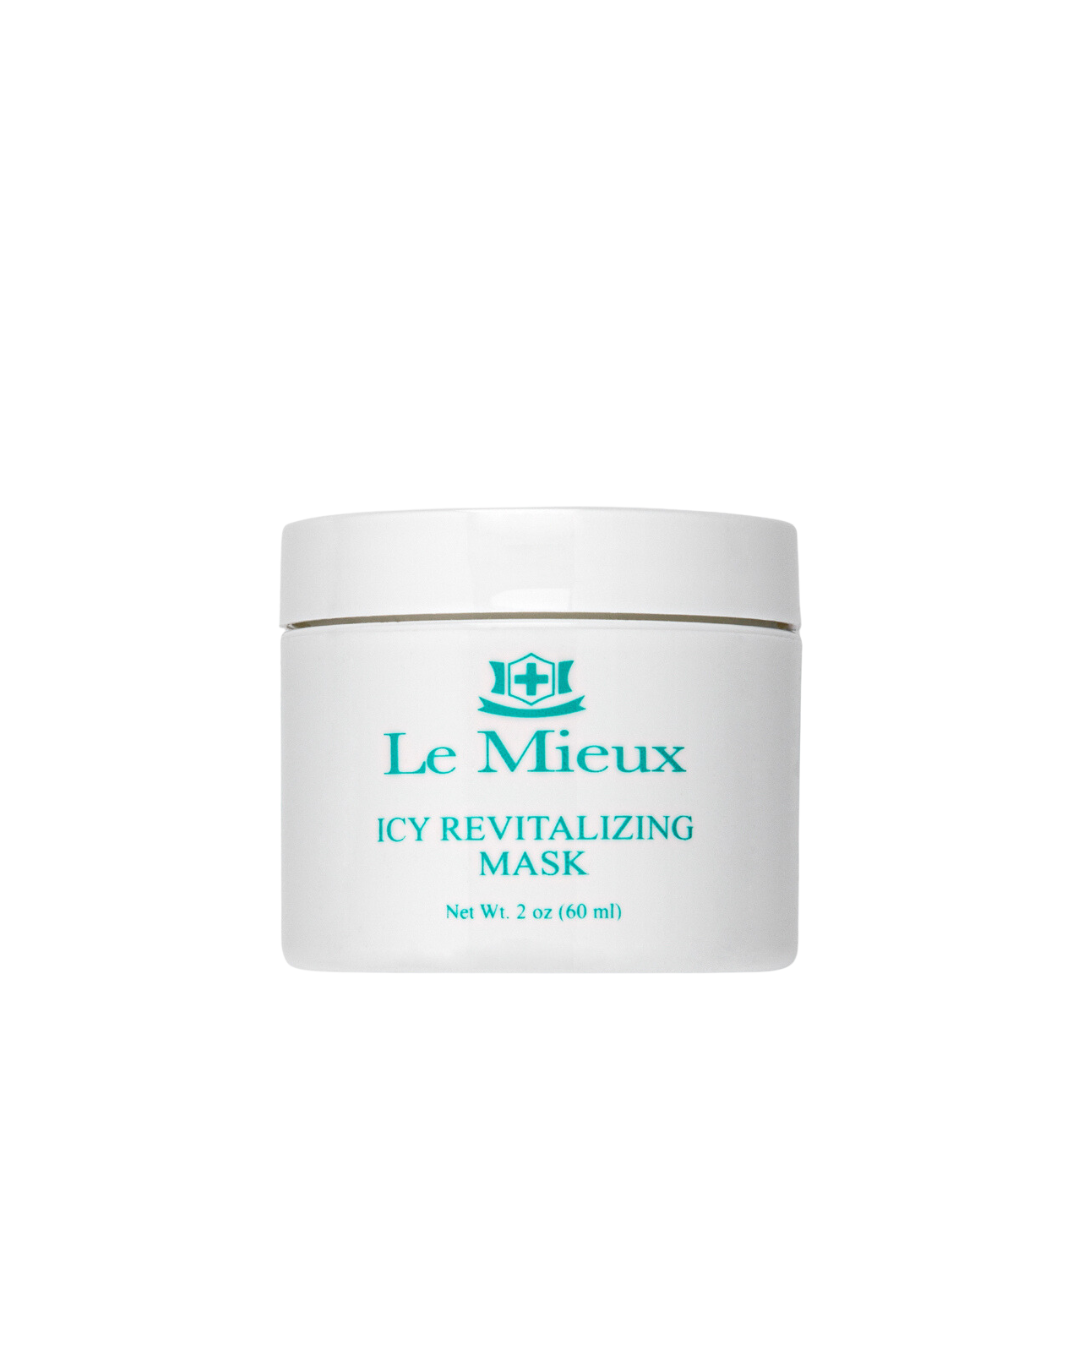 Le Mieux Icy Revitalizing Mask